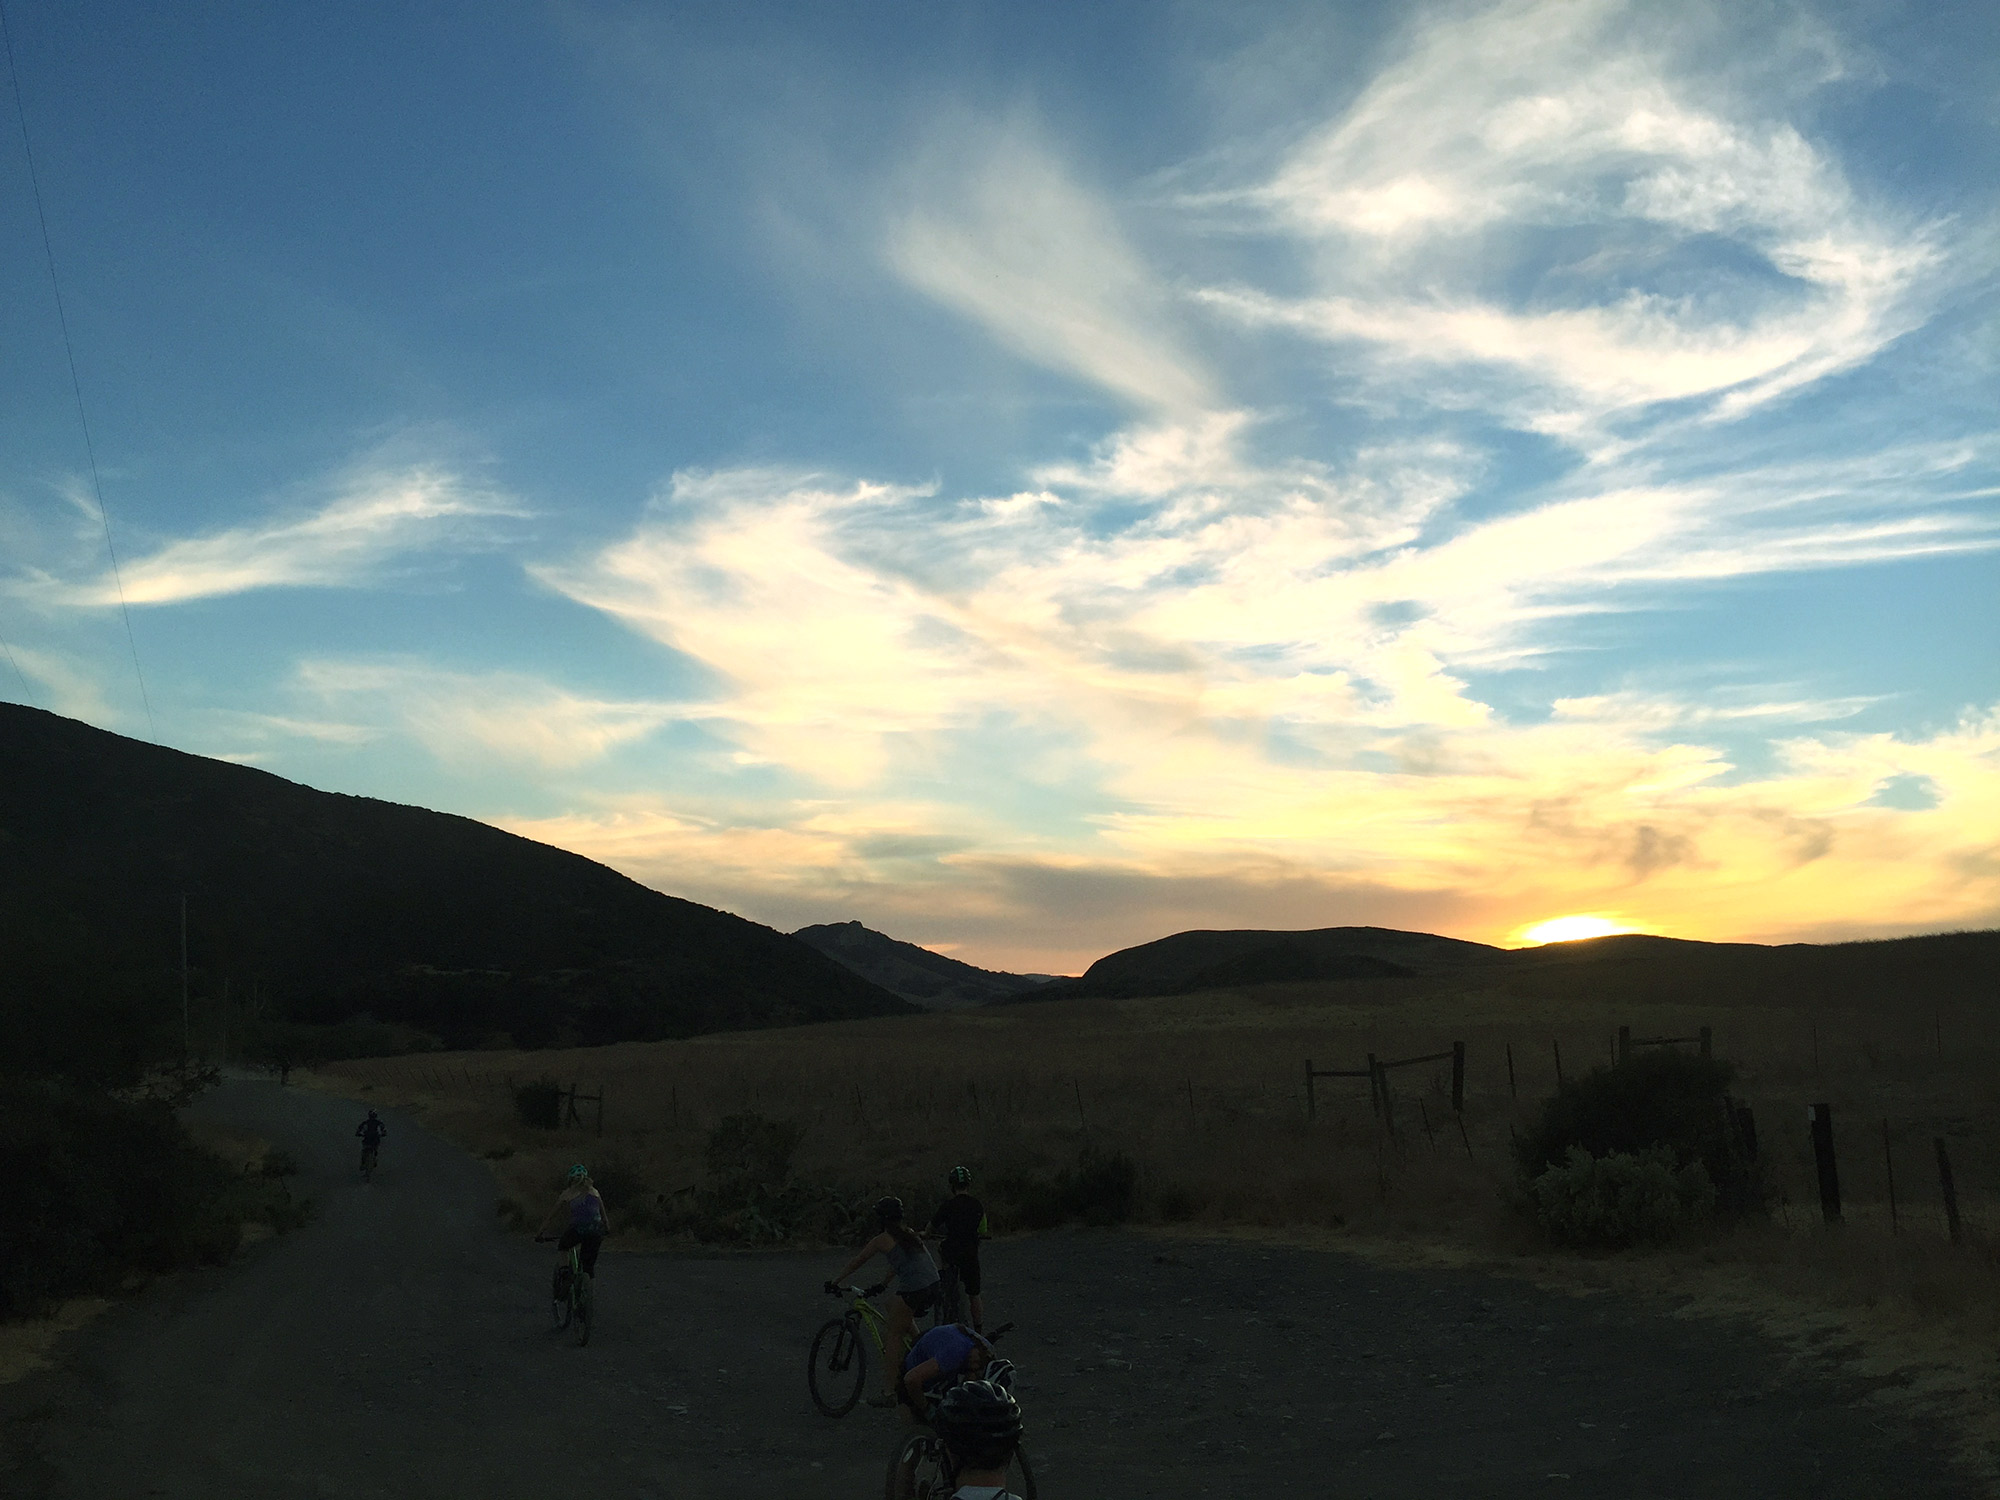 Oct. 7, 2016 – Fall evenings lead to sunset chasing. During Hawaii Friday, it is increasingly difficult to focus on riding. Numerous Cal Poly Cycling members roll down Stenner Creek Trail, all attempting a quick return to campus.